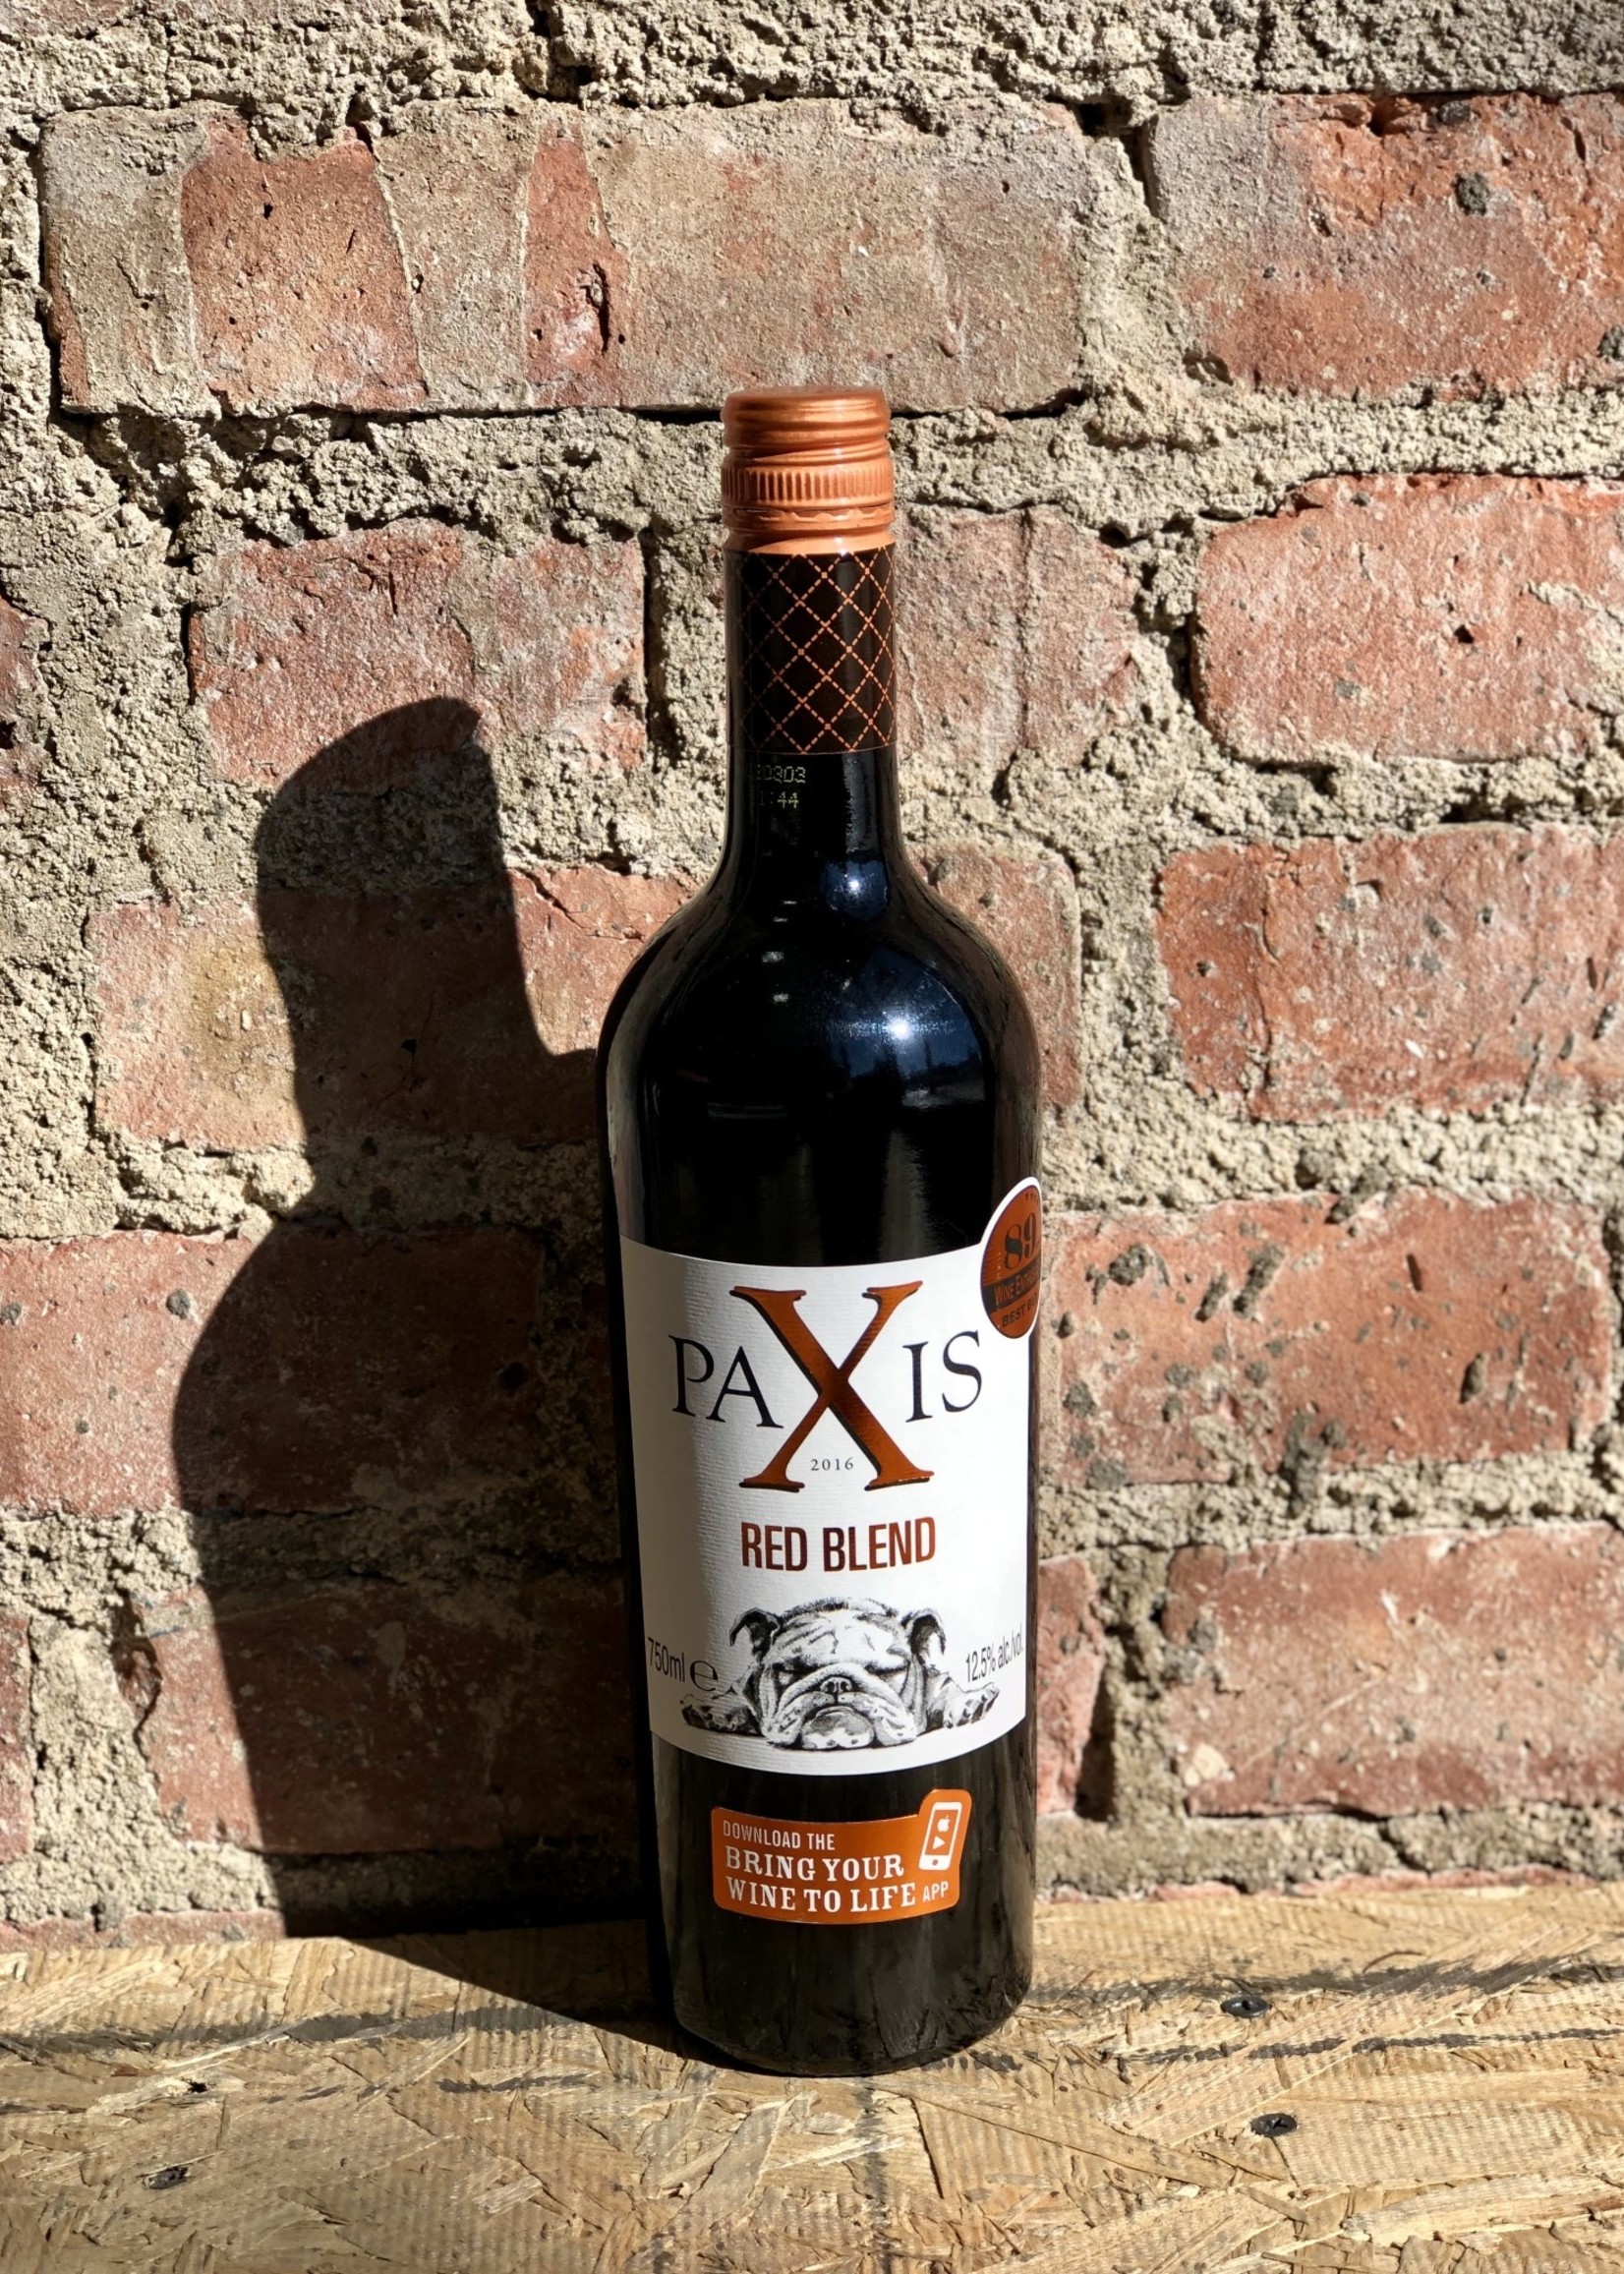 sweet red wine Paxis Bull Dog Red Blend (Lisboa, Portugal) 2016